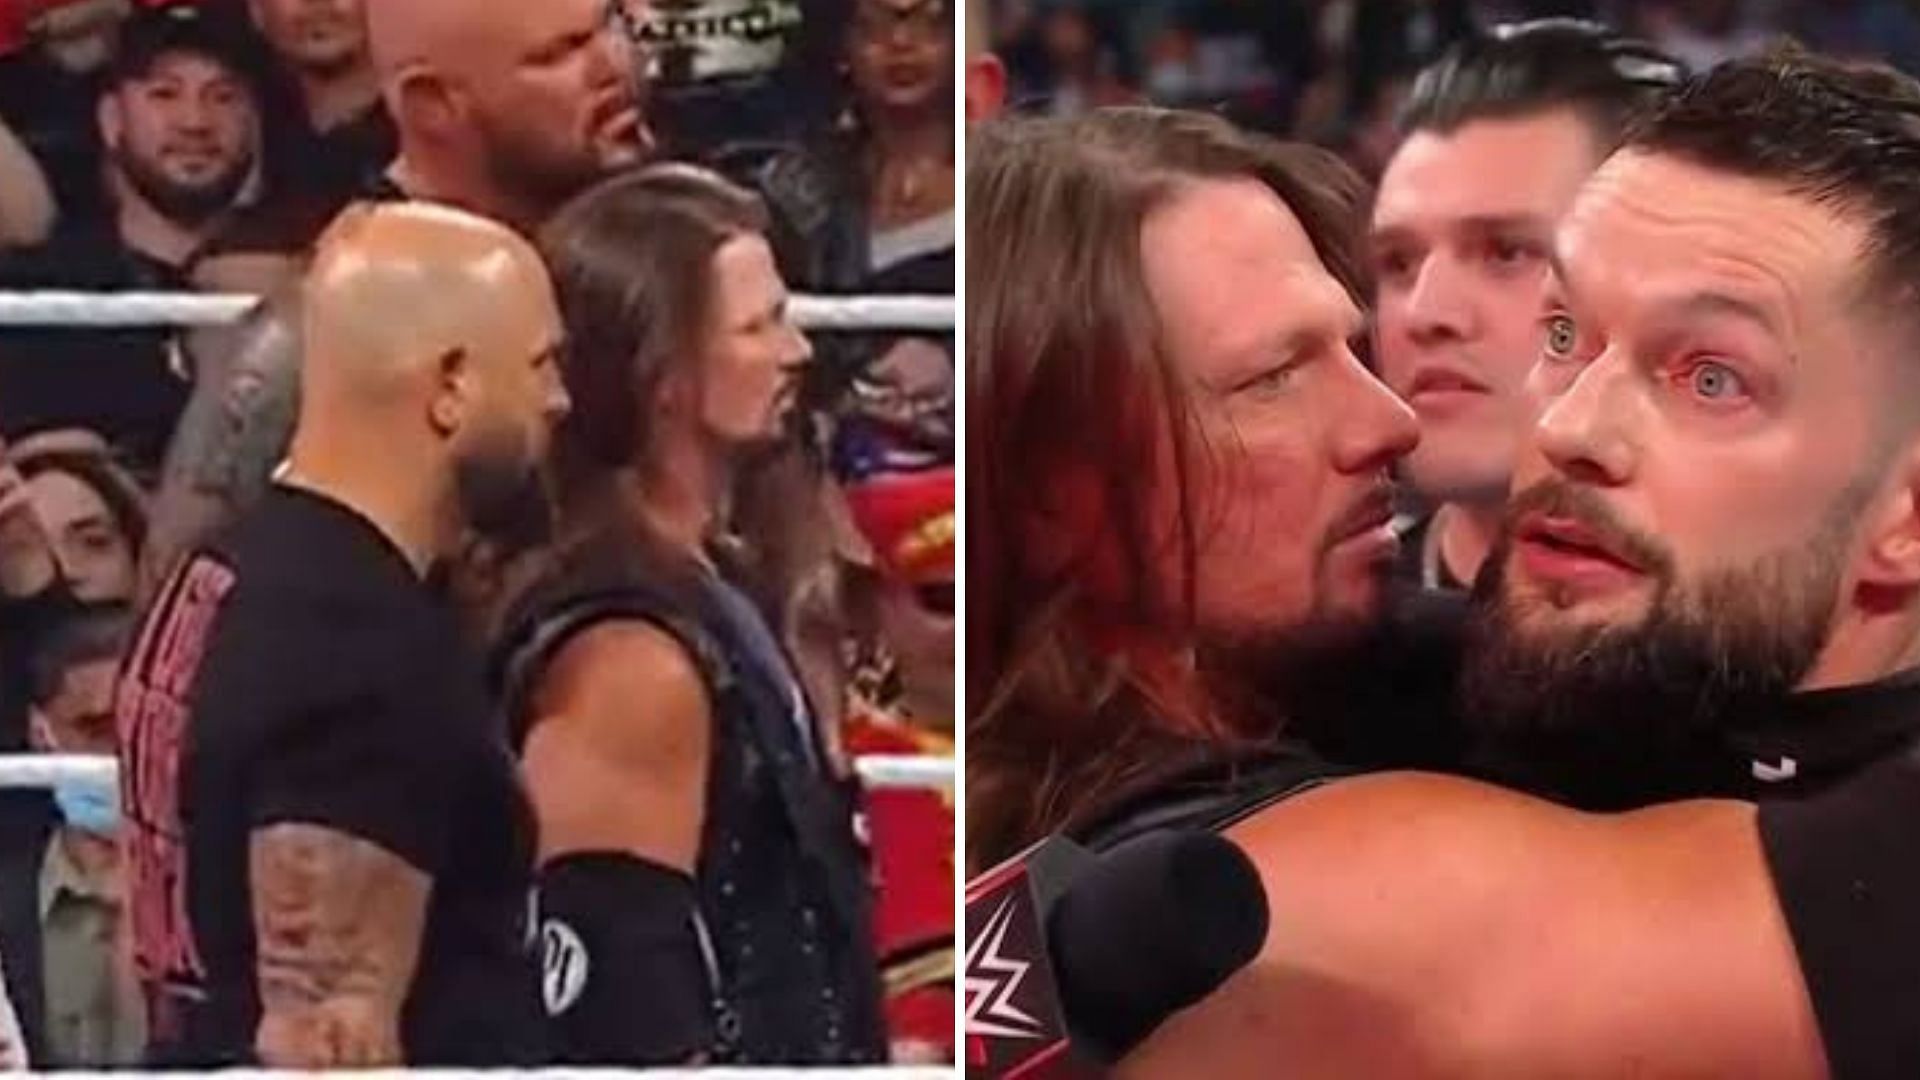 The O.C reunited on RAW this week.